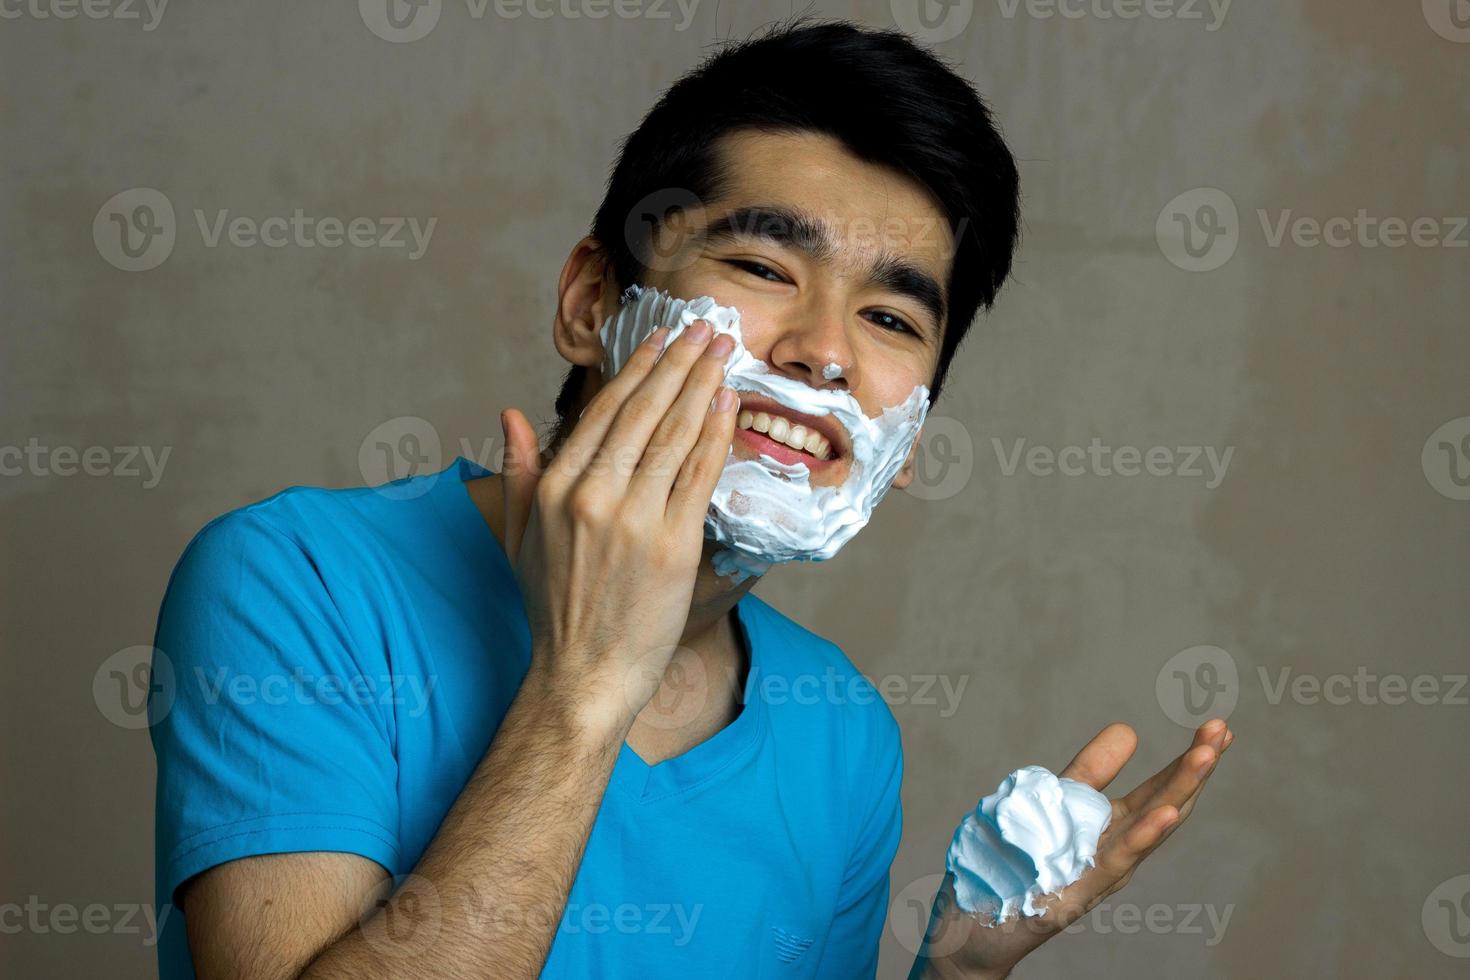 beautiful smiling guy with black hair is causing the foam to beard close-up photo